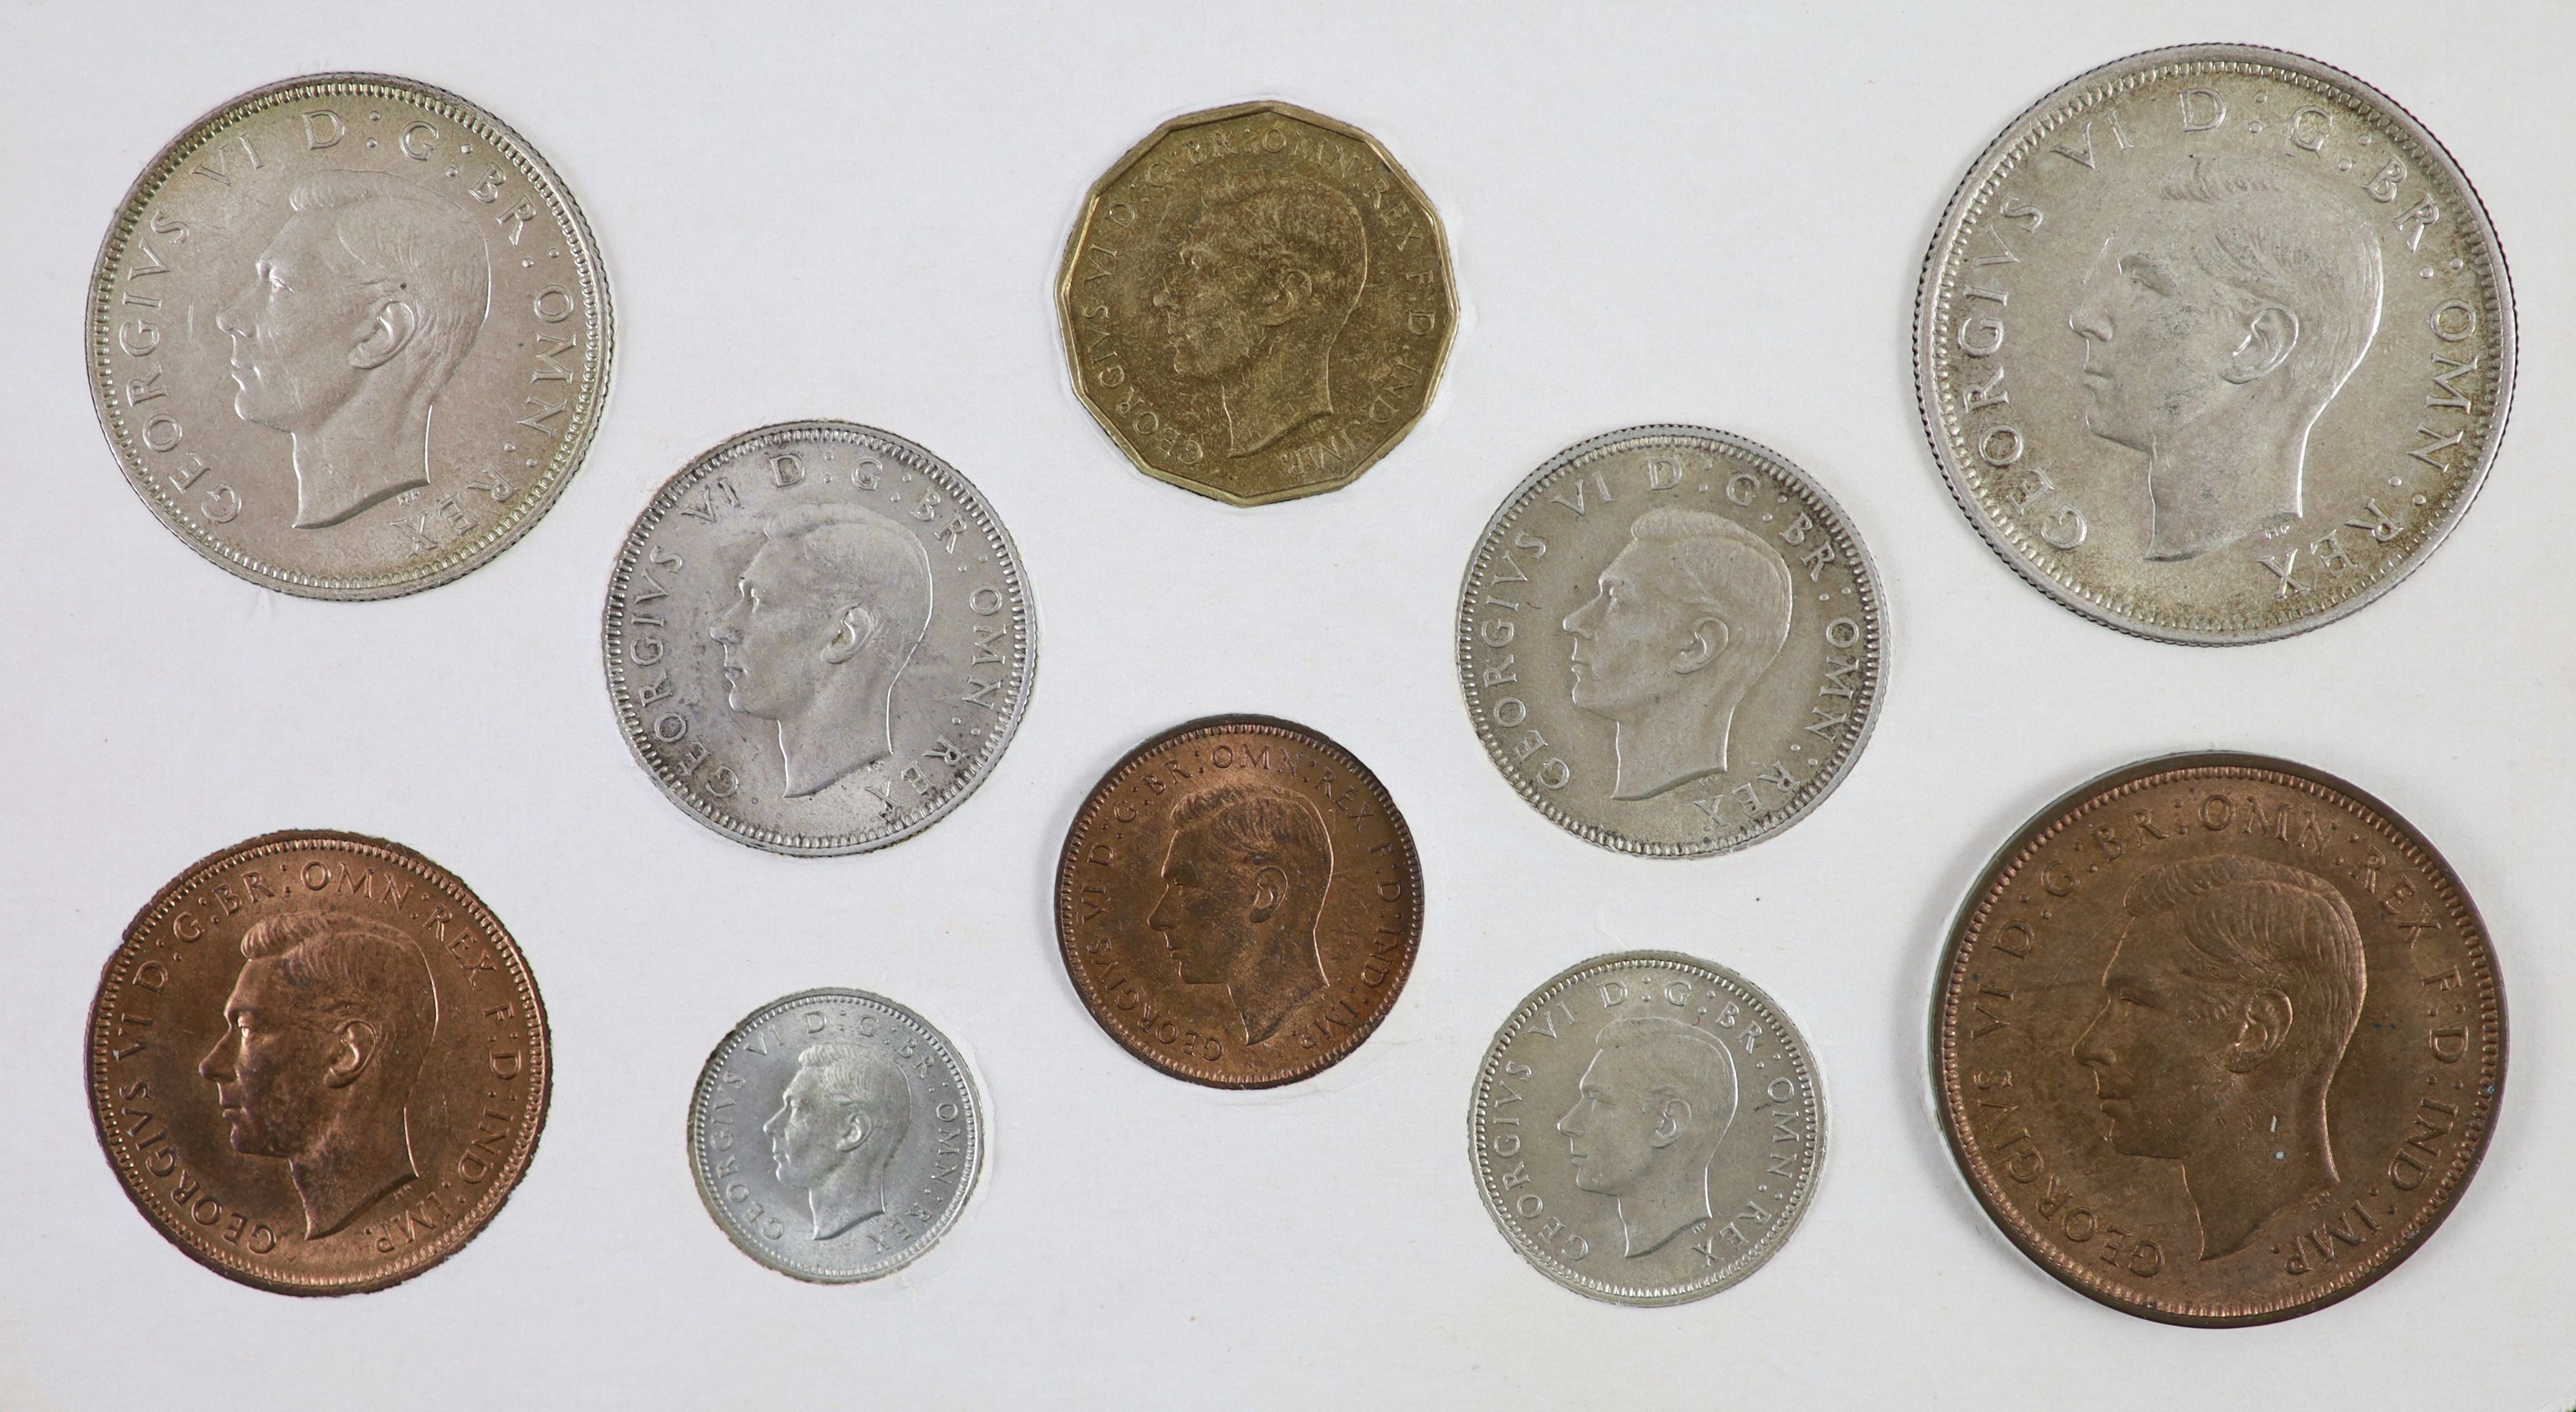 George VI specimen set of eleven coins, 1937, first coinage, comprising Crown, halfcrown, florin, ‘English’ & ‘Scottish’ shillings, sixpence, brass threepence, silver threepence, about EF, the penny, halfpenny and farthi